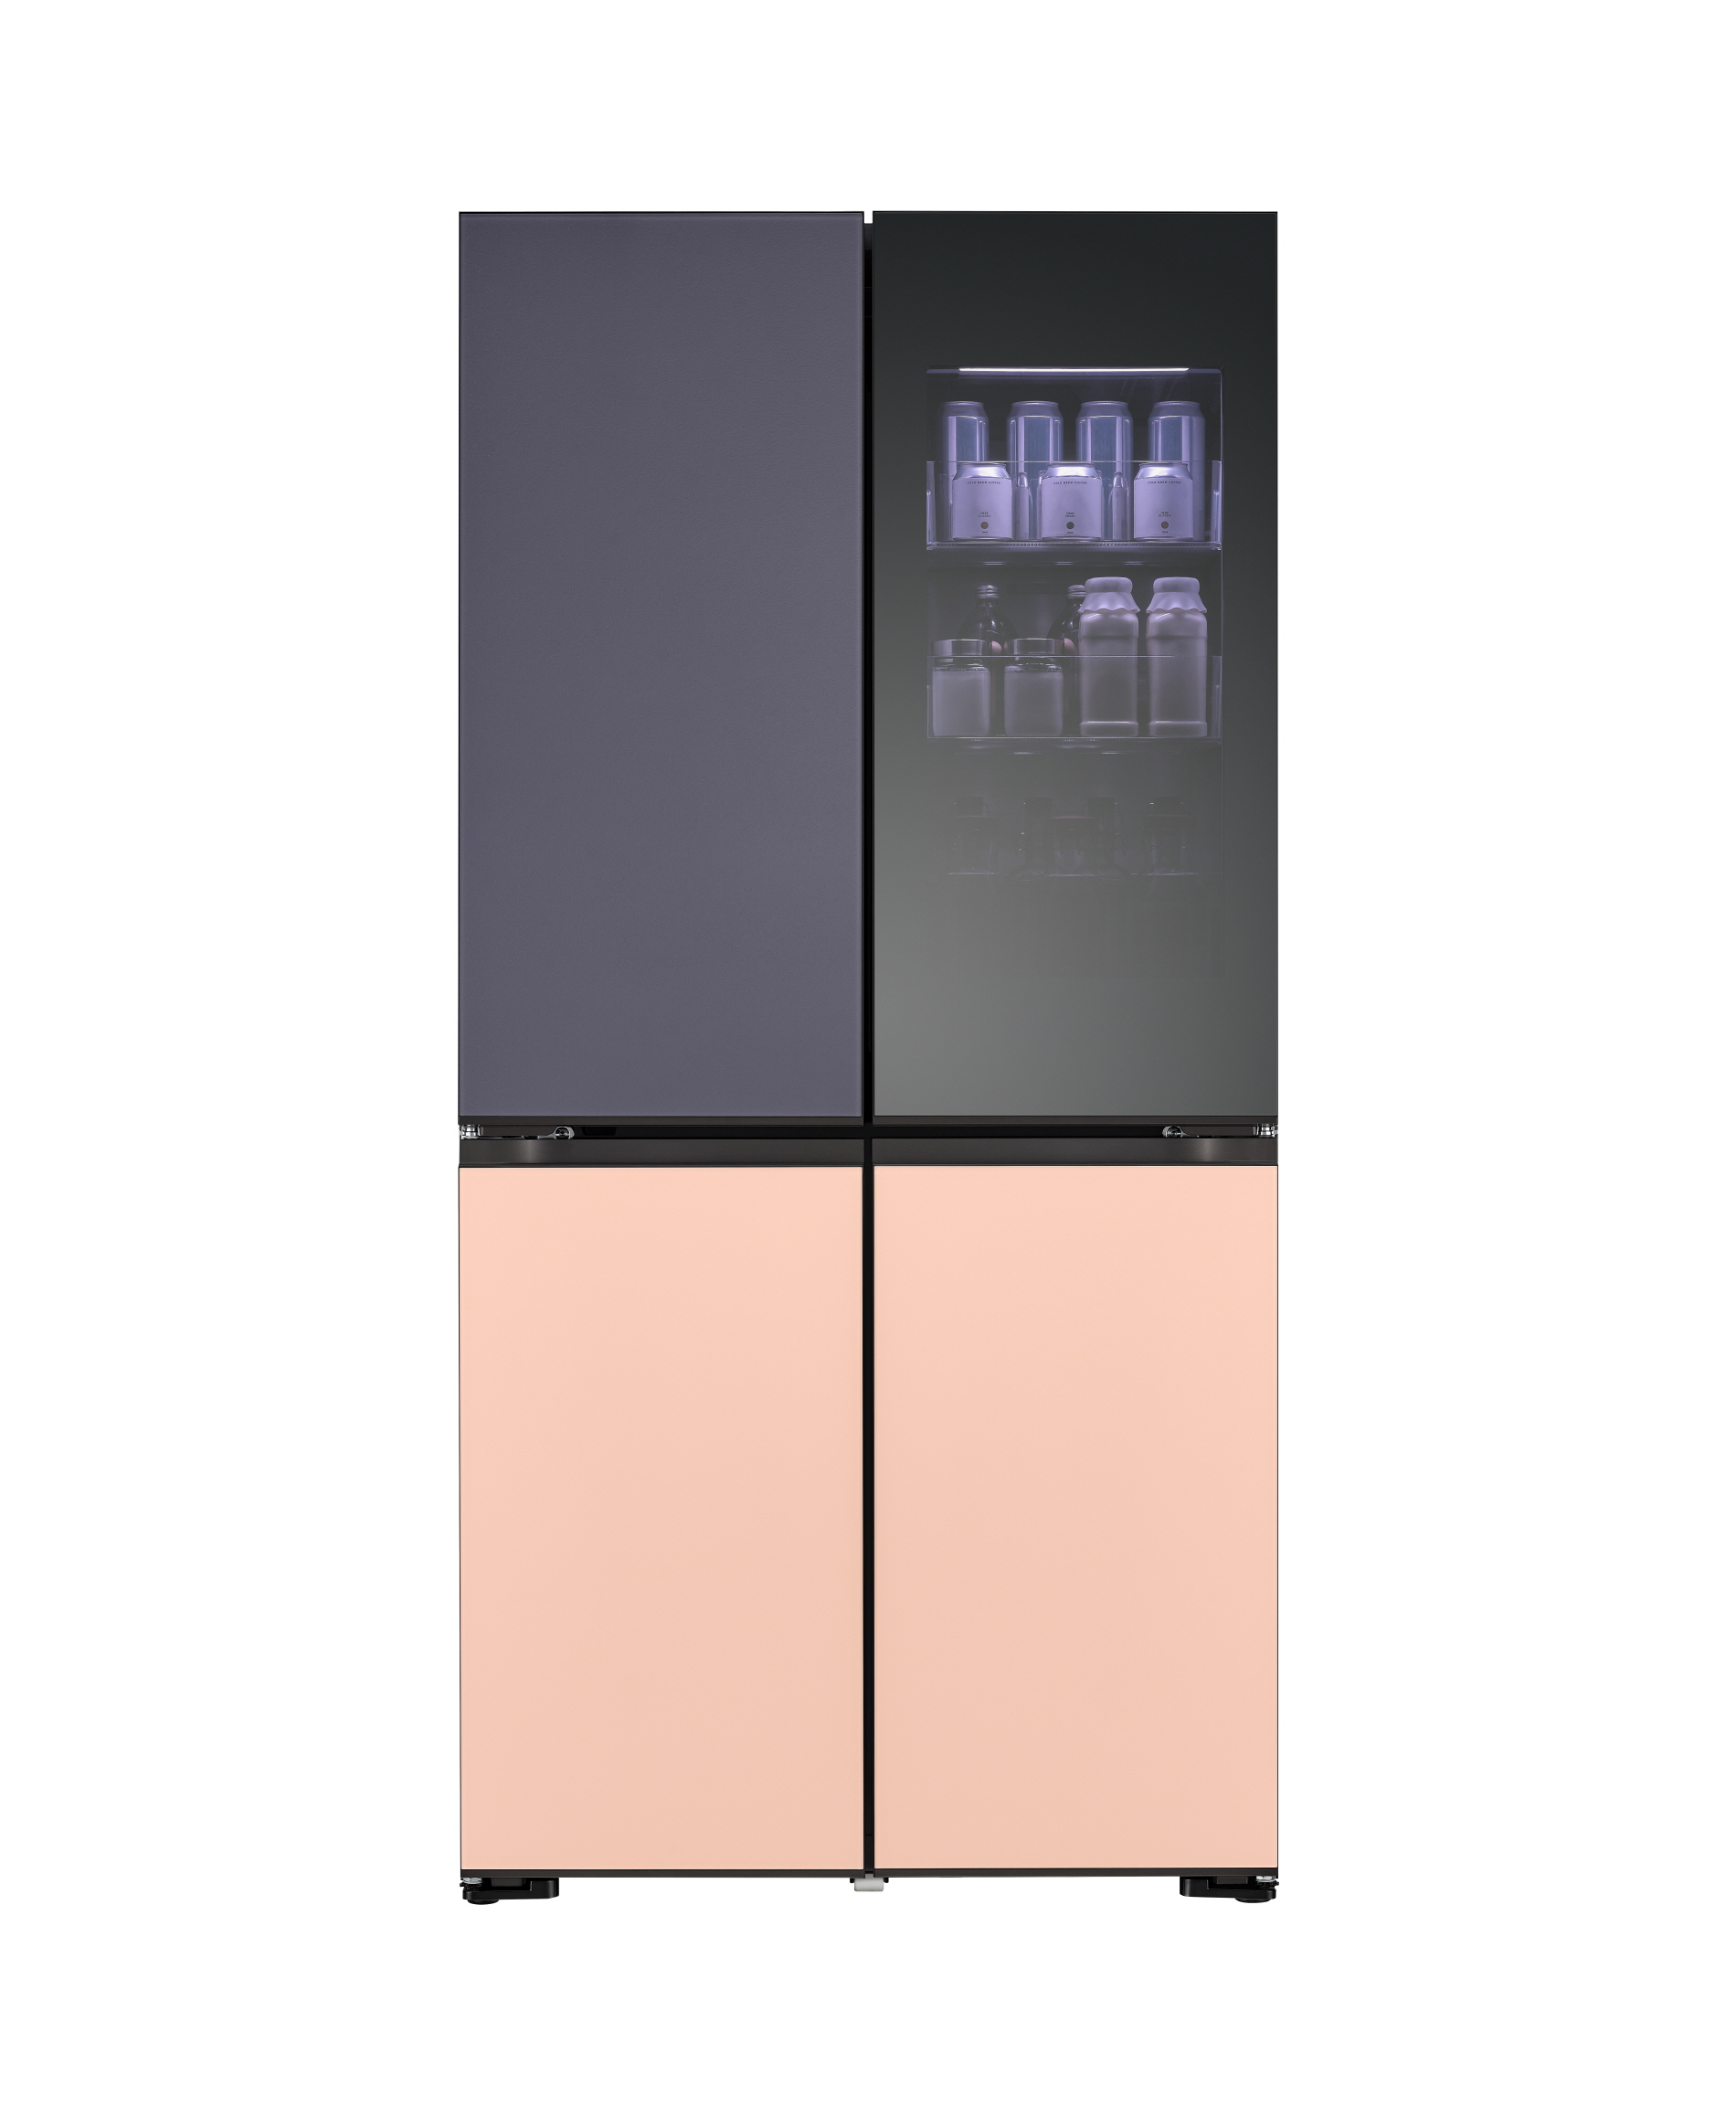 LG MoodUPTM refrigerator in Paris theme color with the light on